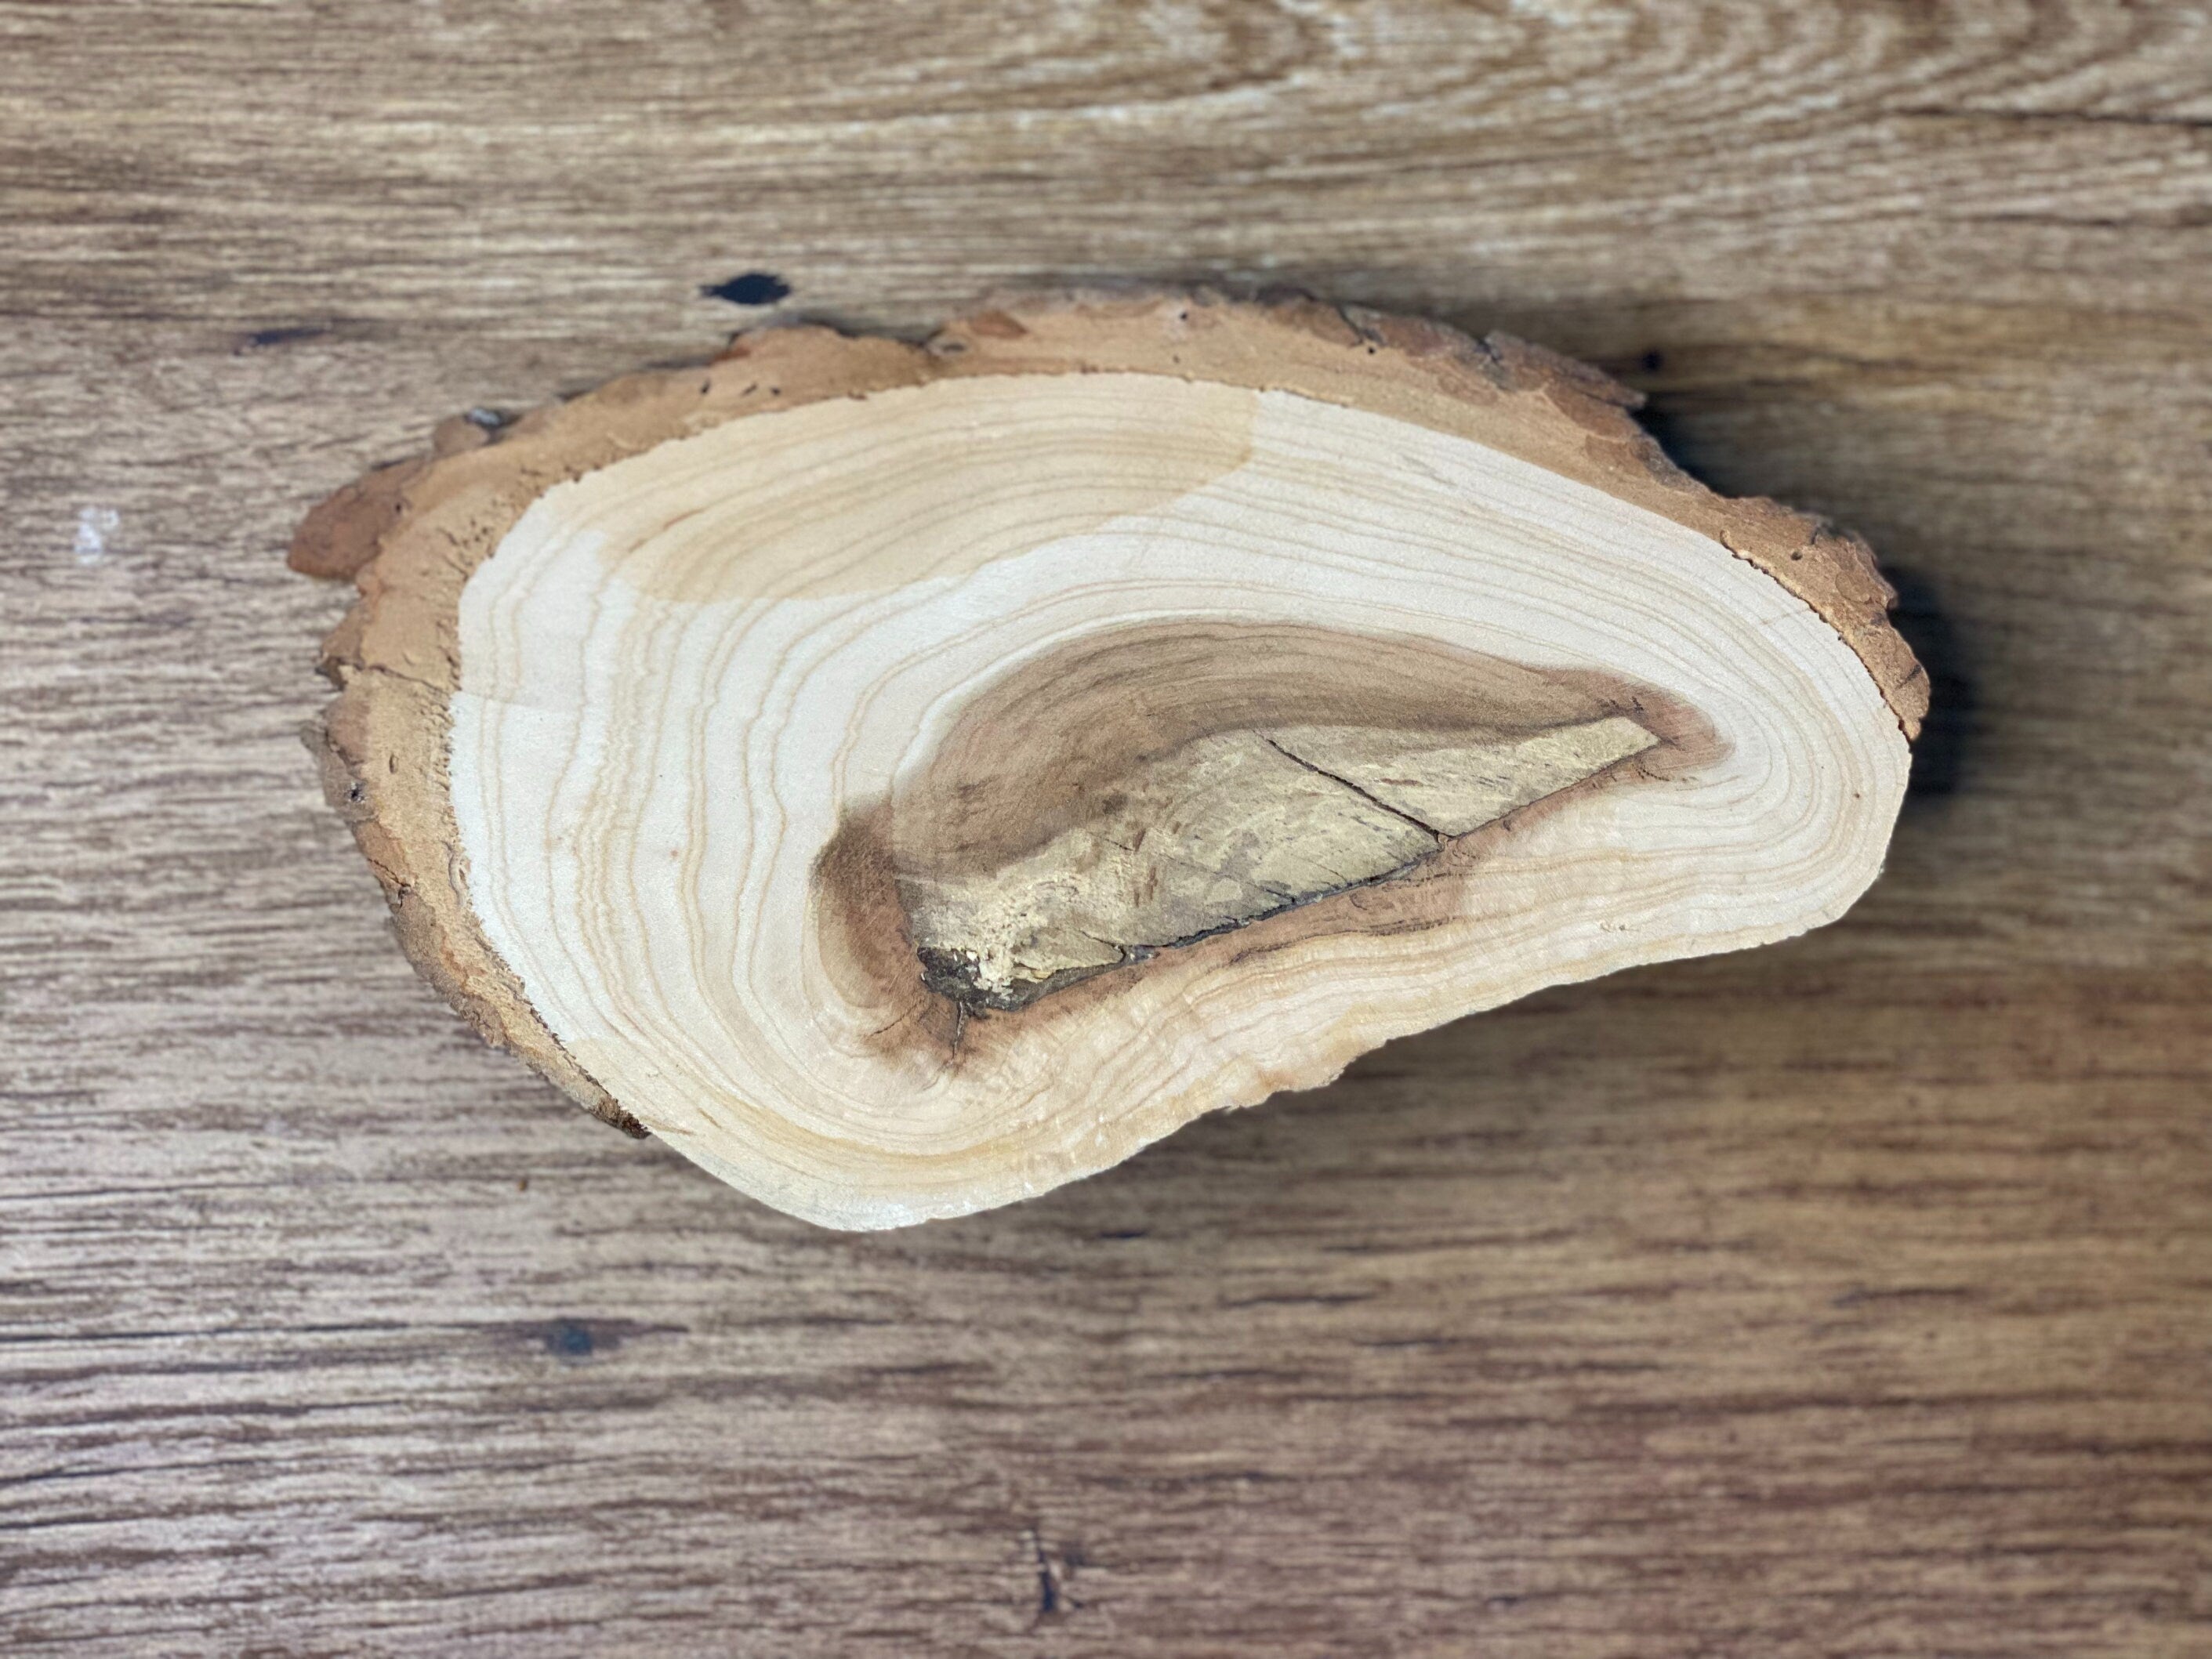 Pine Wedge, Pine Slice, Approximately 8 Inches Long by 4.75 Inches Wide and 1.5 Inches Tall